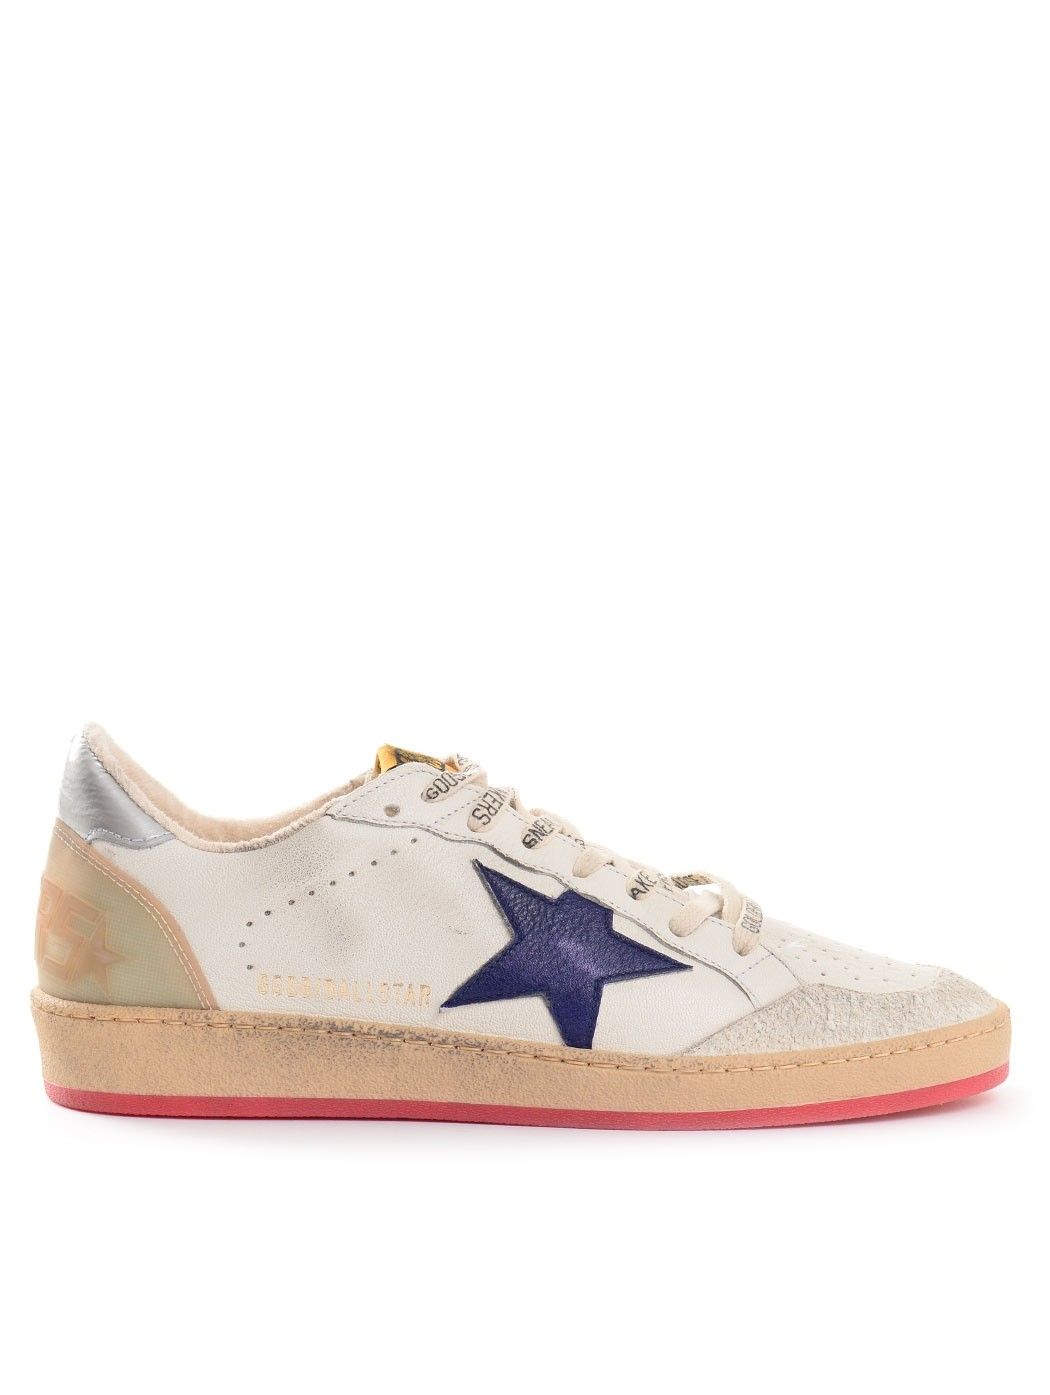  MAN SHOES,SPRING SUMMER SHOES,CHURCH'S SHOES,DIADORA HERITAGE SHOES,DIADORA HERITAGE SNEAKERS,GOLDEN GOOSE SHOES,GOLDEN GOOSE SNEAKERS  GOLDEN GOOSE GMF00117